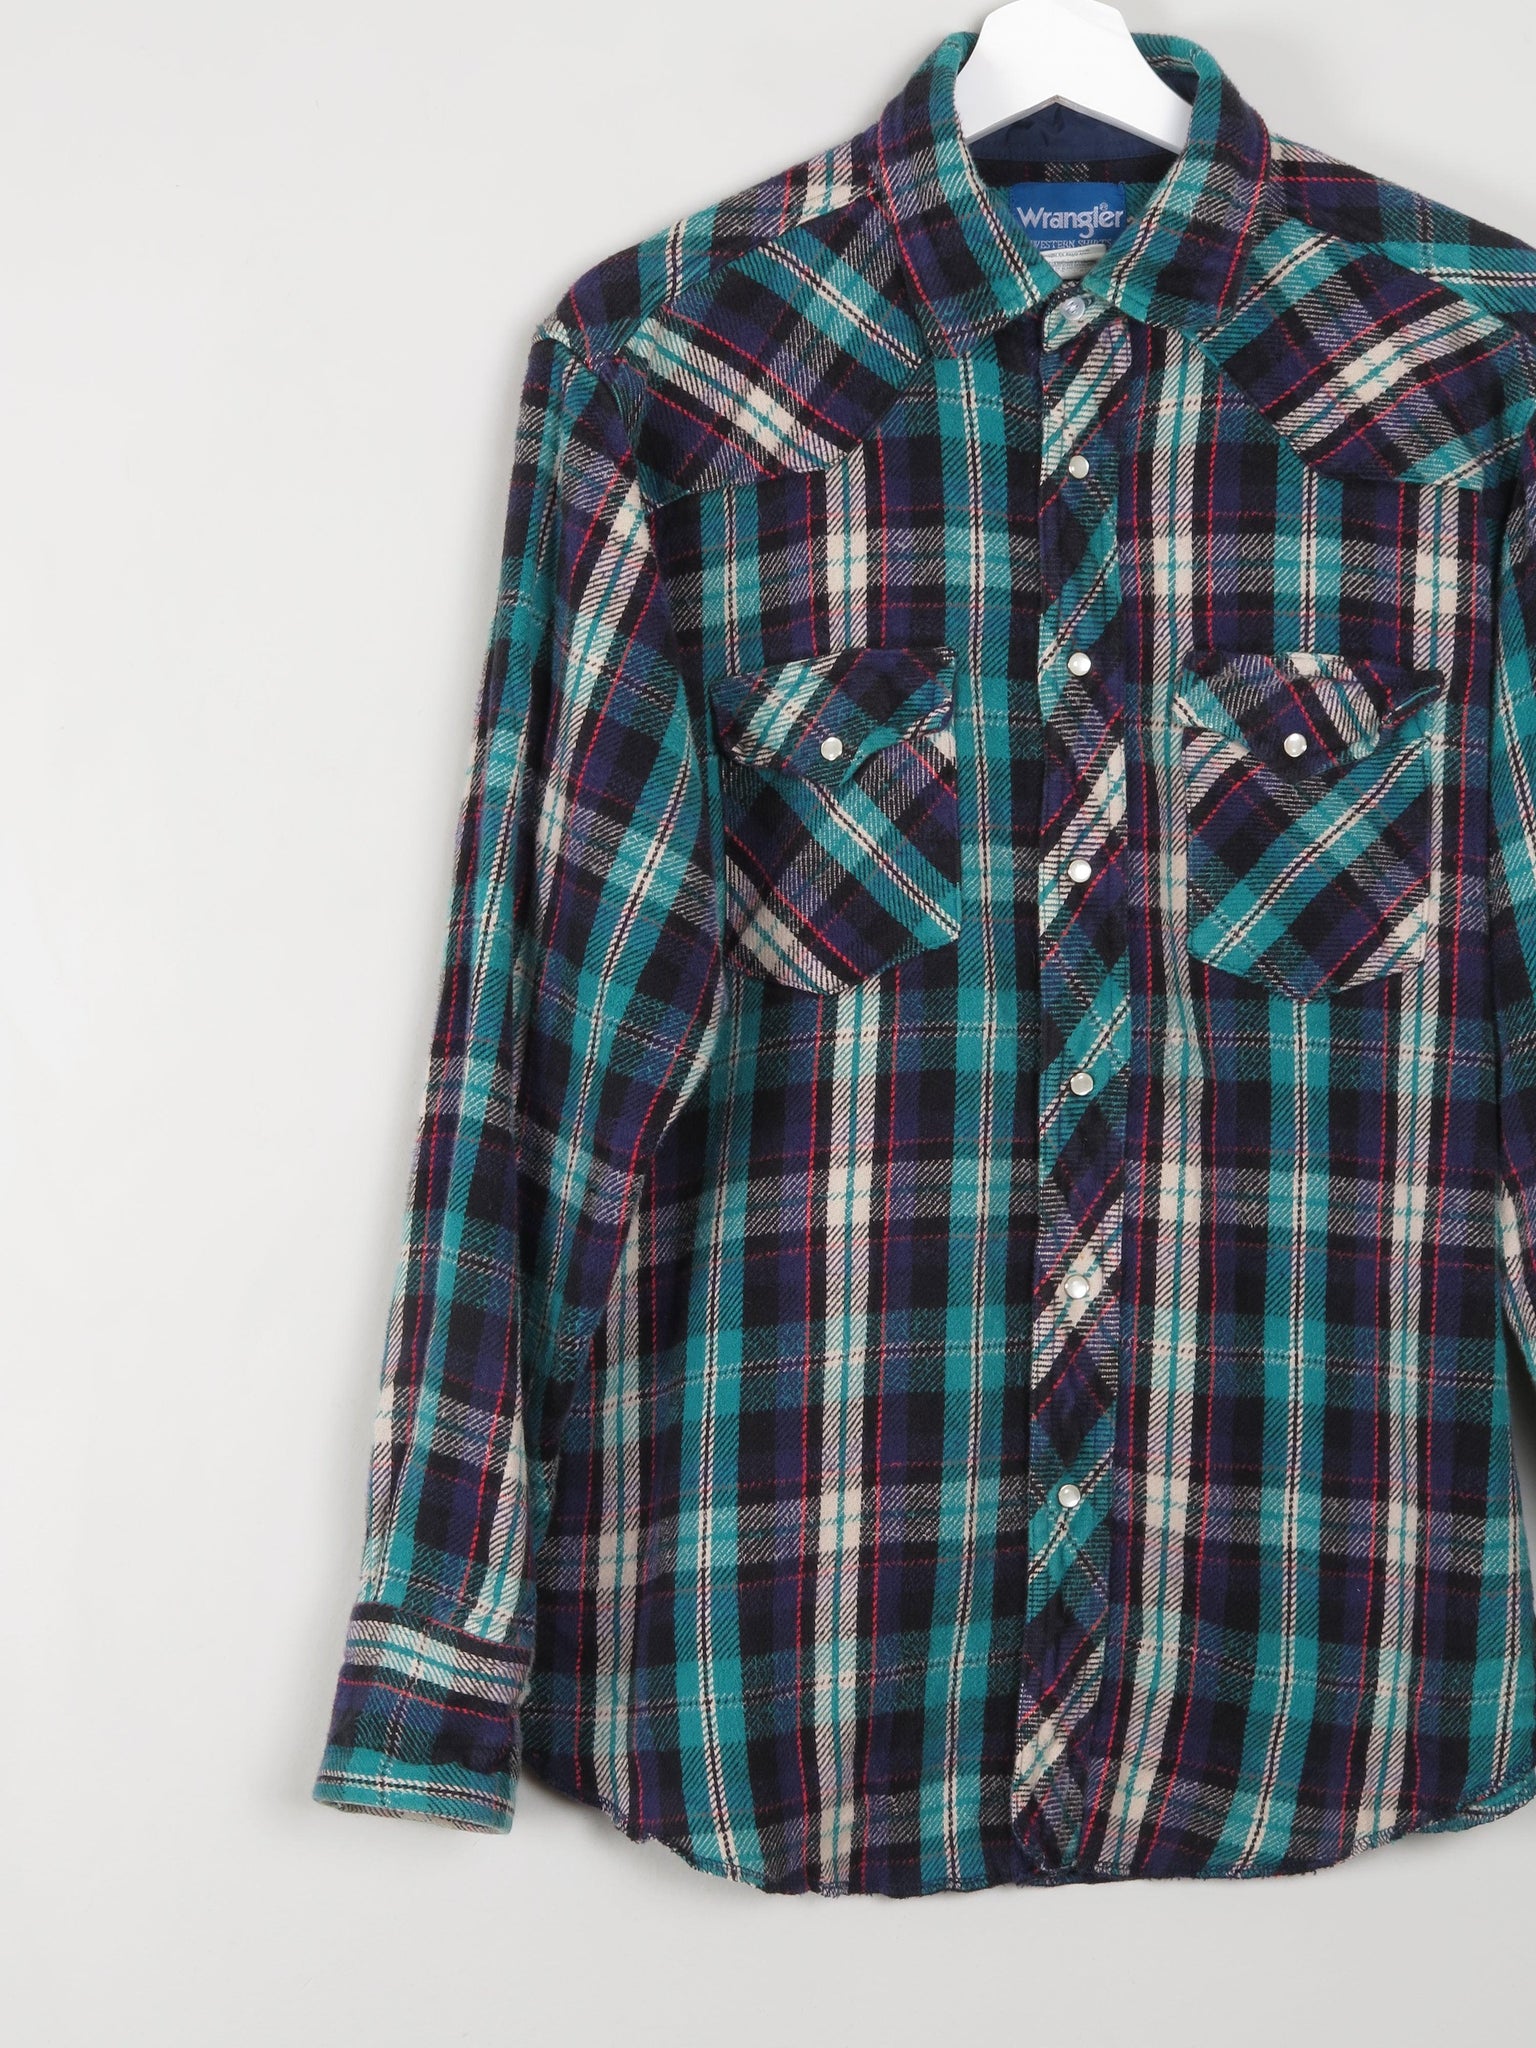 Men's Green/Navy/Red Western Heavy Quality Vintage Flannel Shirt M - The Harlequin